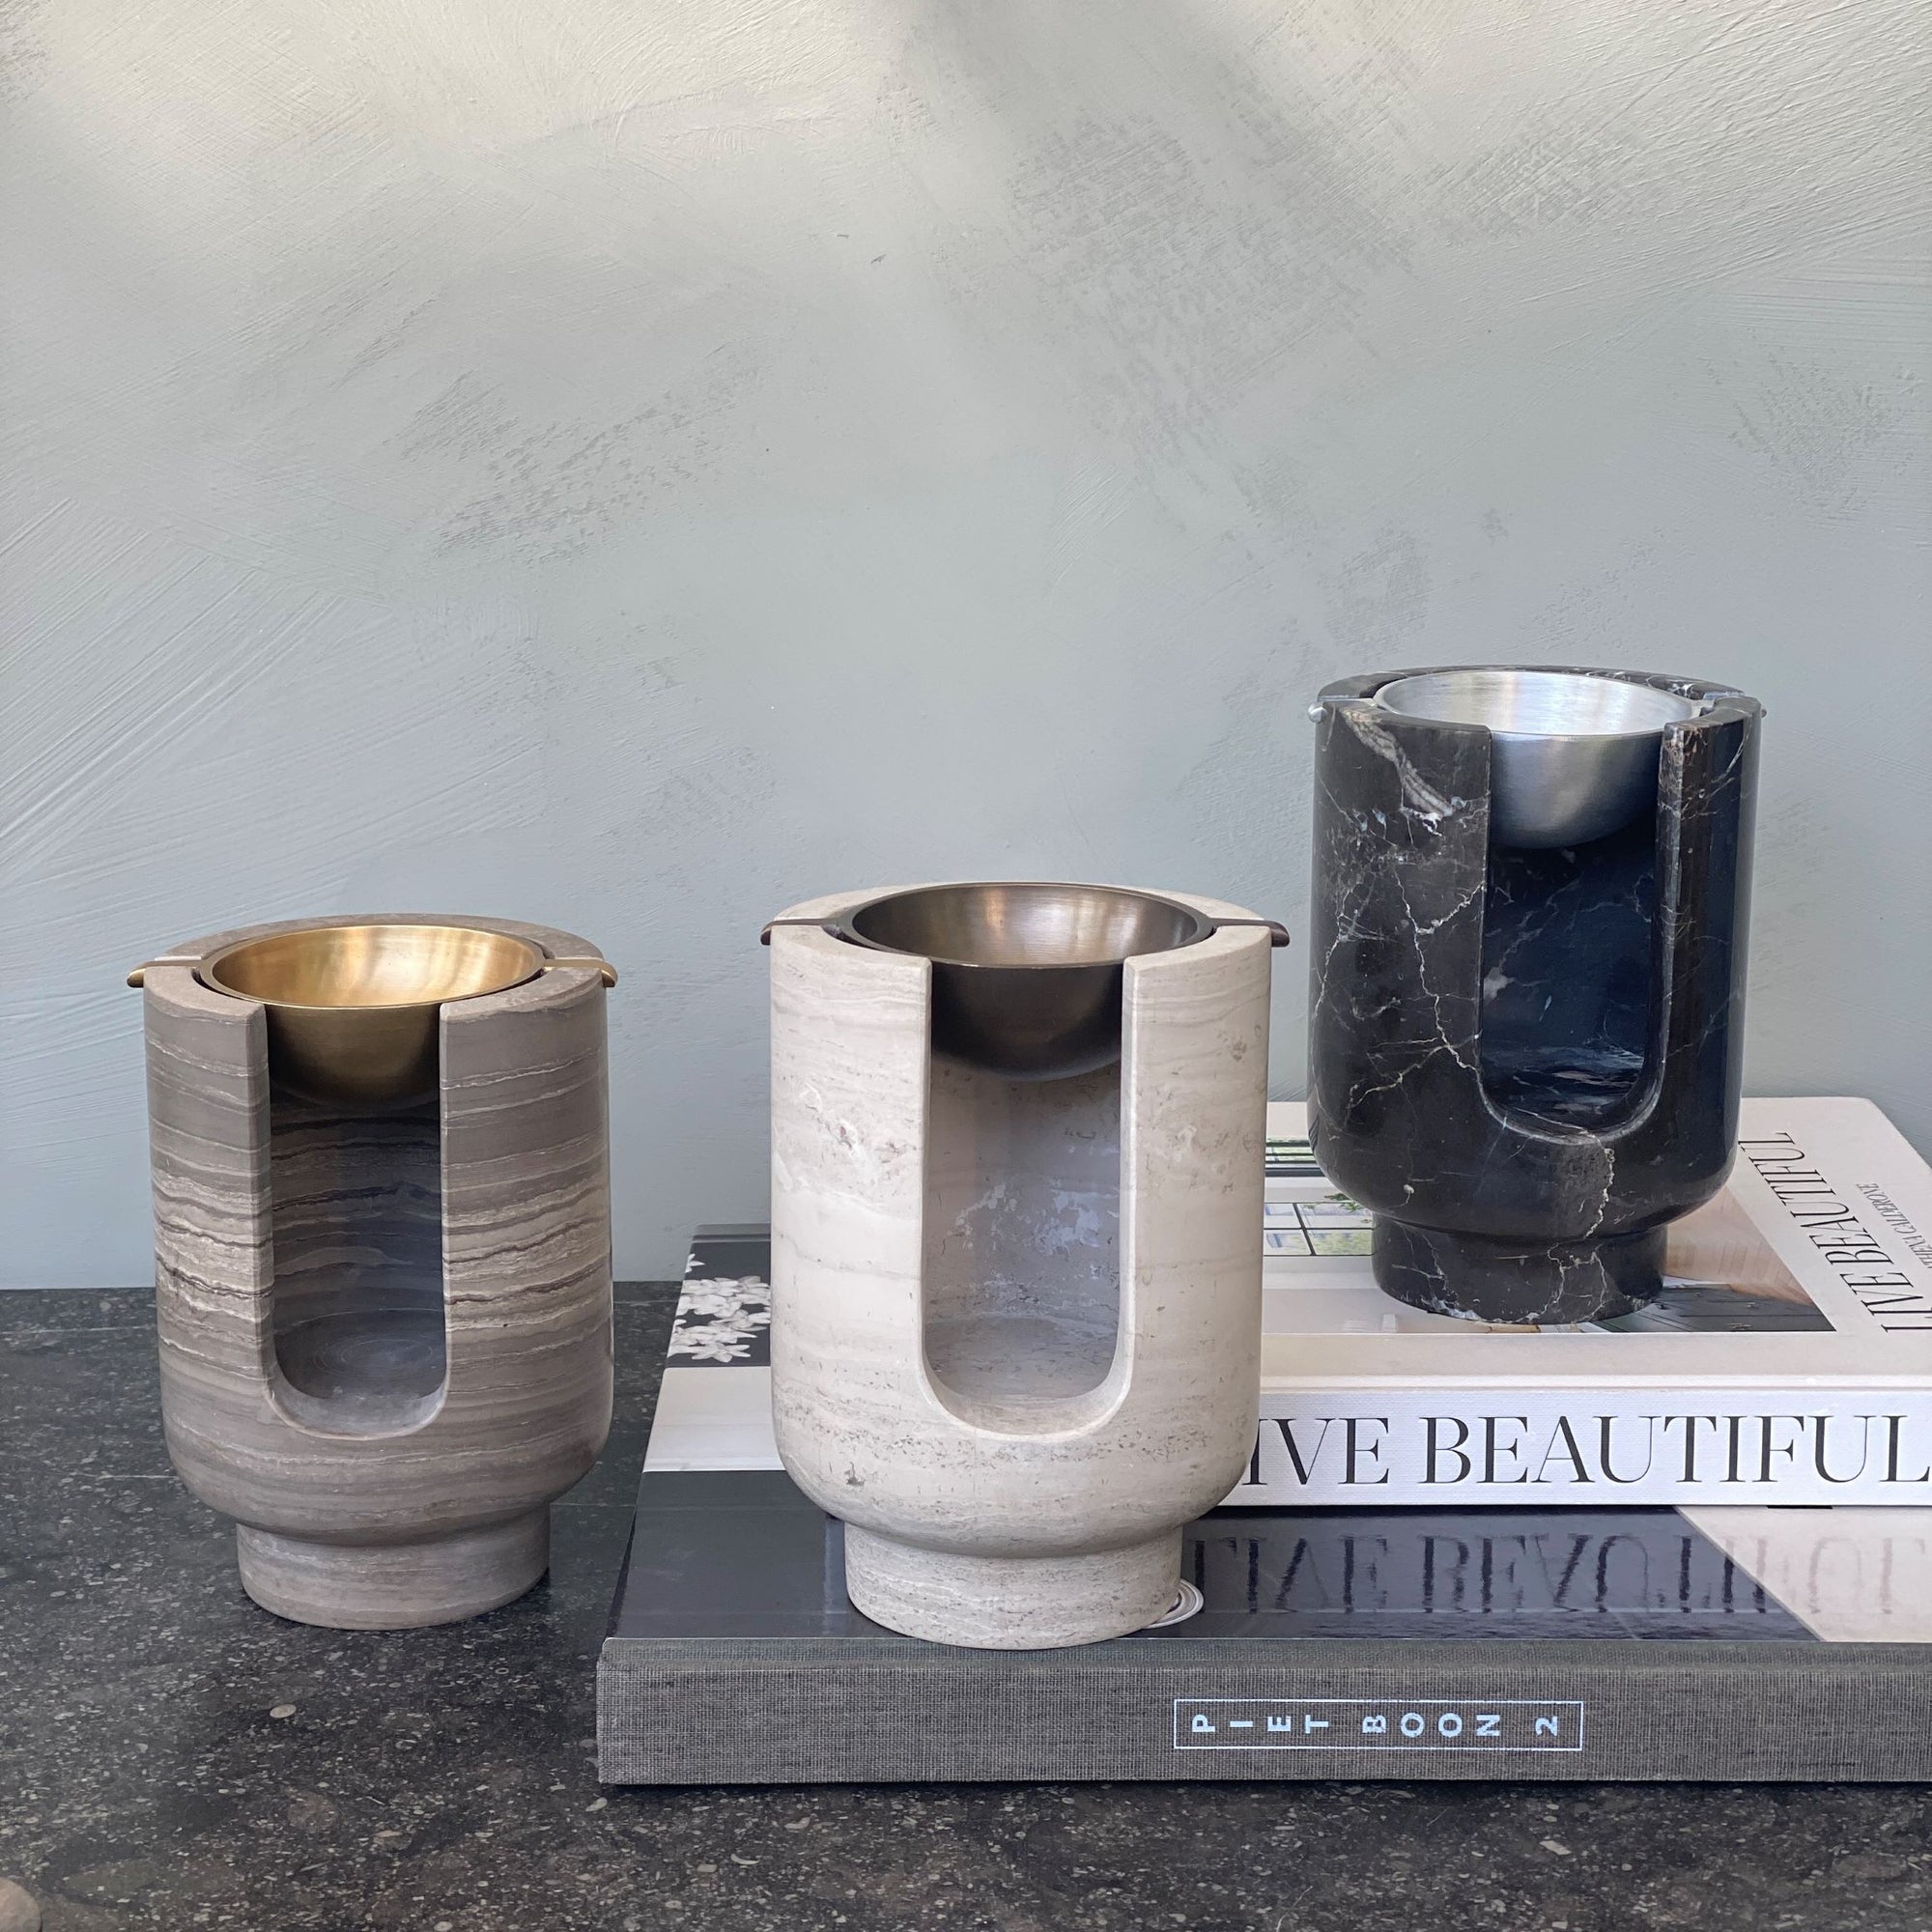 AURA Oil burner from BRANDT Collective in marble Shadow Black and Satin alunimnium bowl